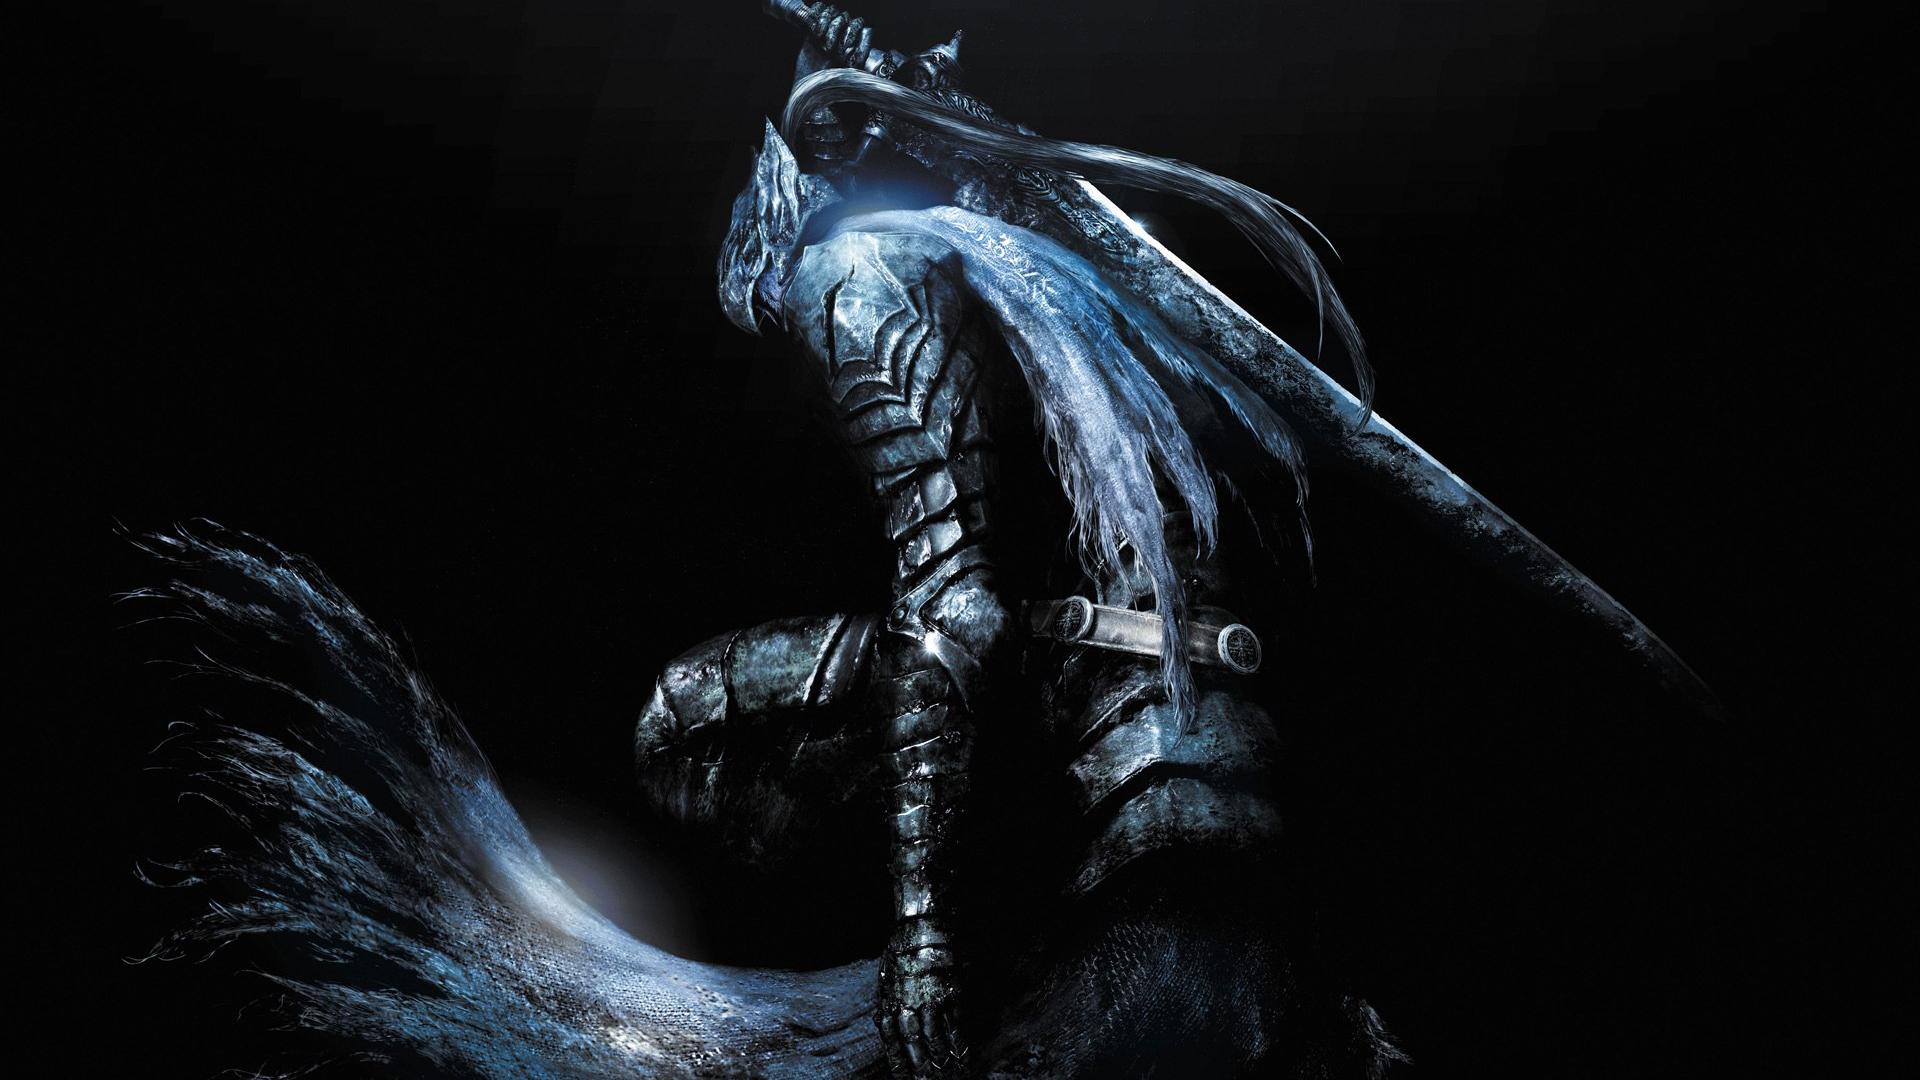 Dark souls wallpaper 1920x1200 - High Quality and other